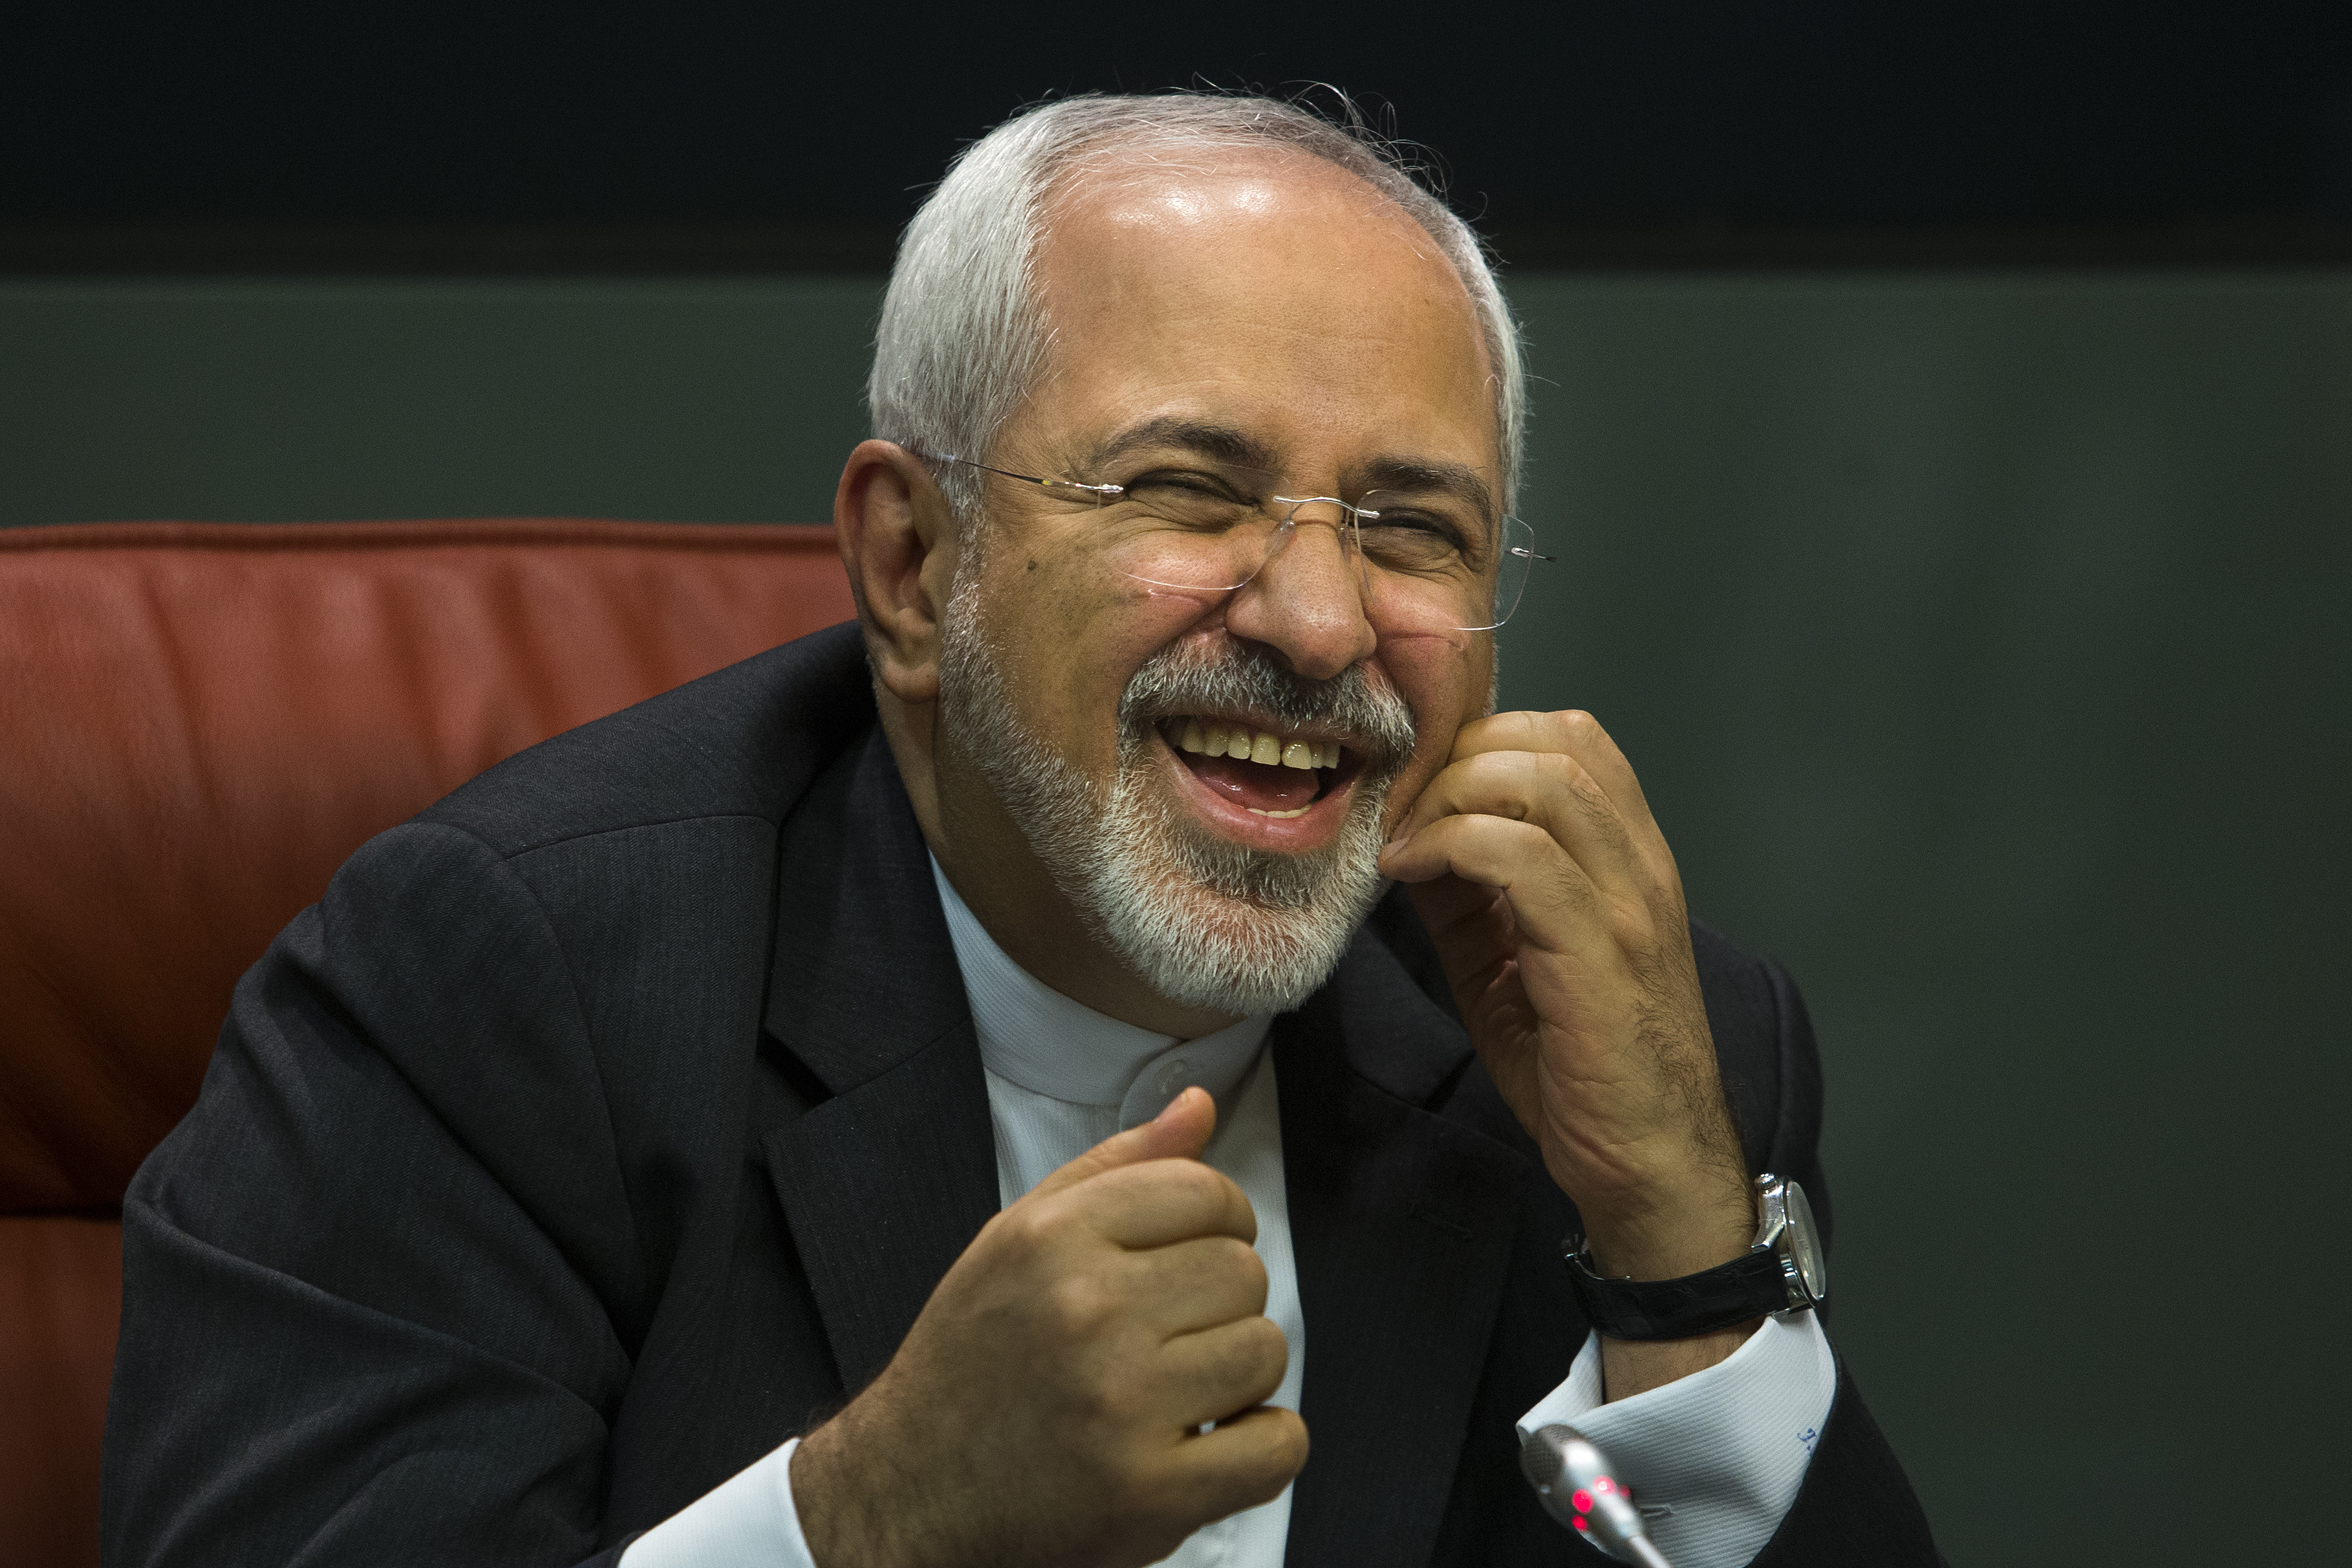 Iranian Foreign Minister Mohammad Javad Zarif laughs during a press conference with his Spanish counterpart Manuel Garcia Margallo, Madrid, Spain, April 14, 2015.